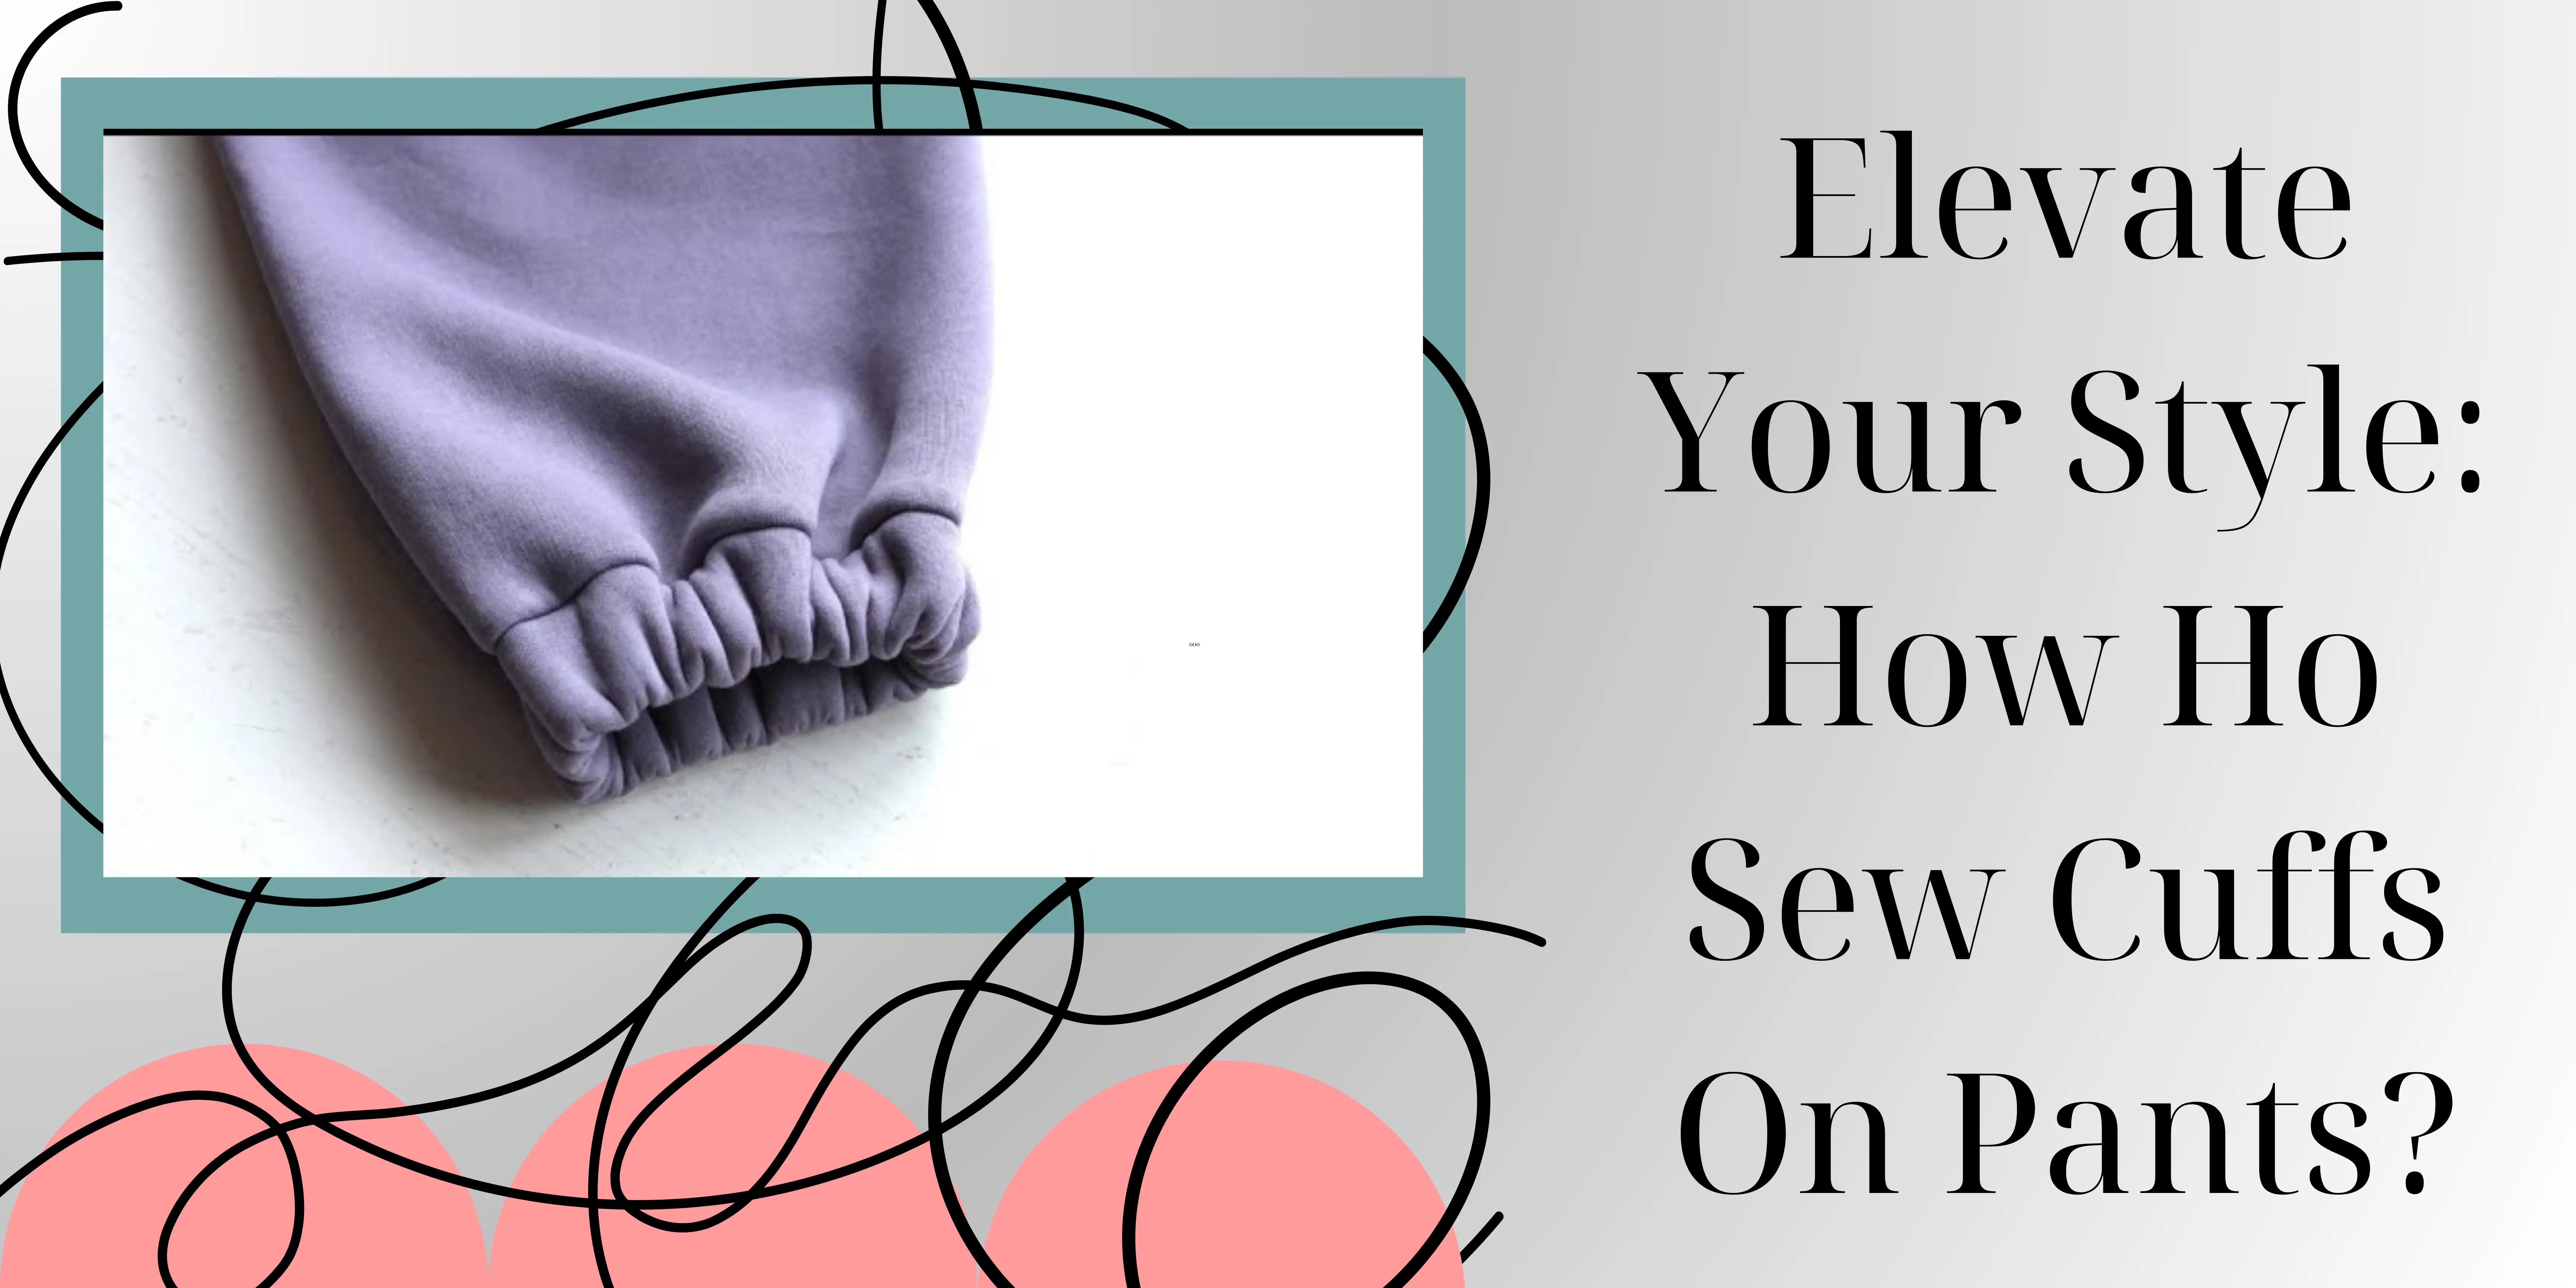 Elevate Your Style: How Ho Sew Cuffs On Pants?